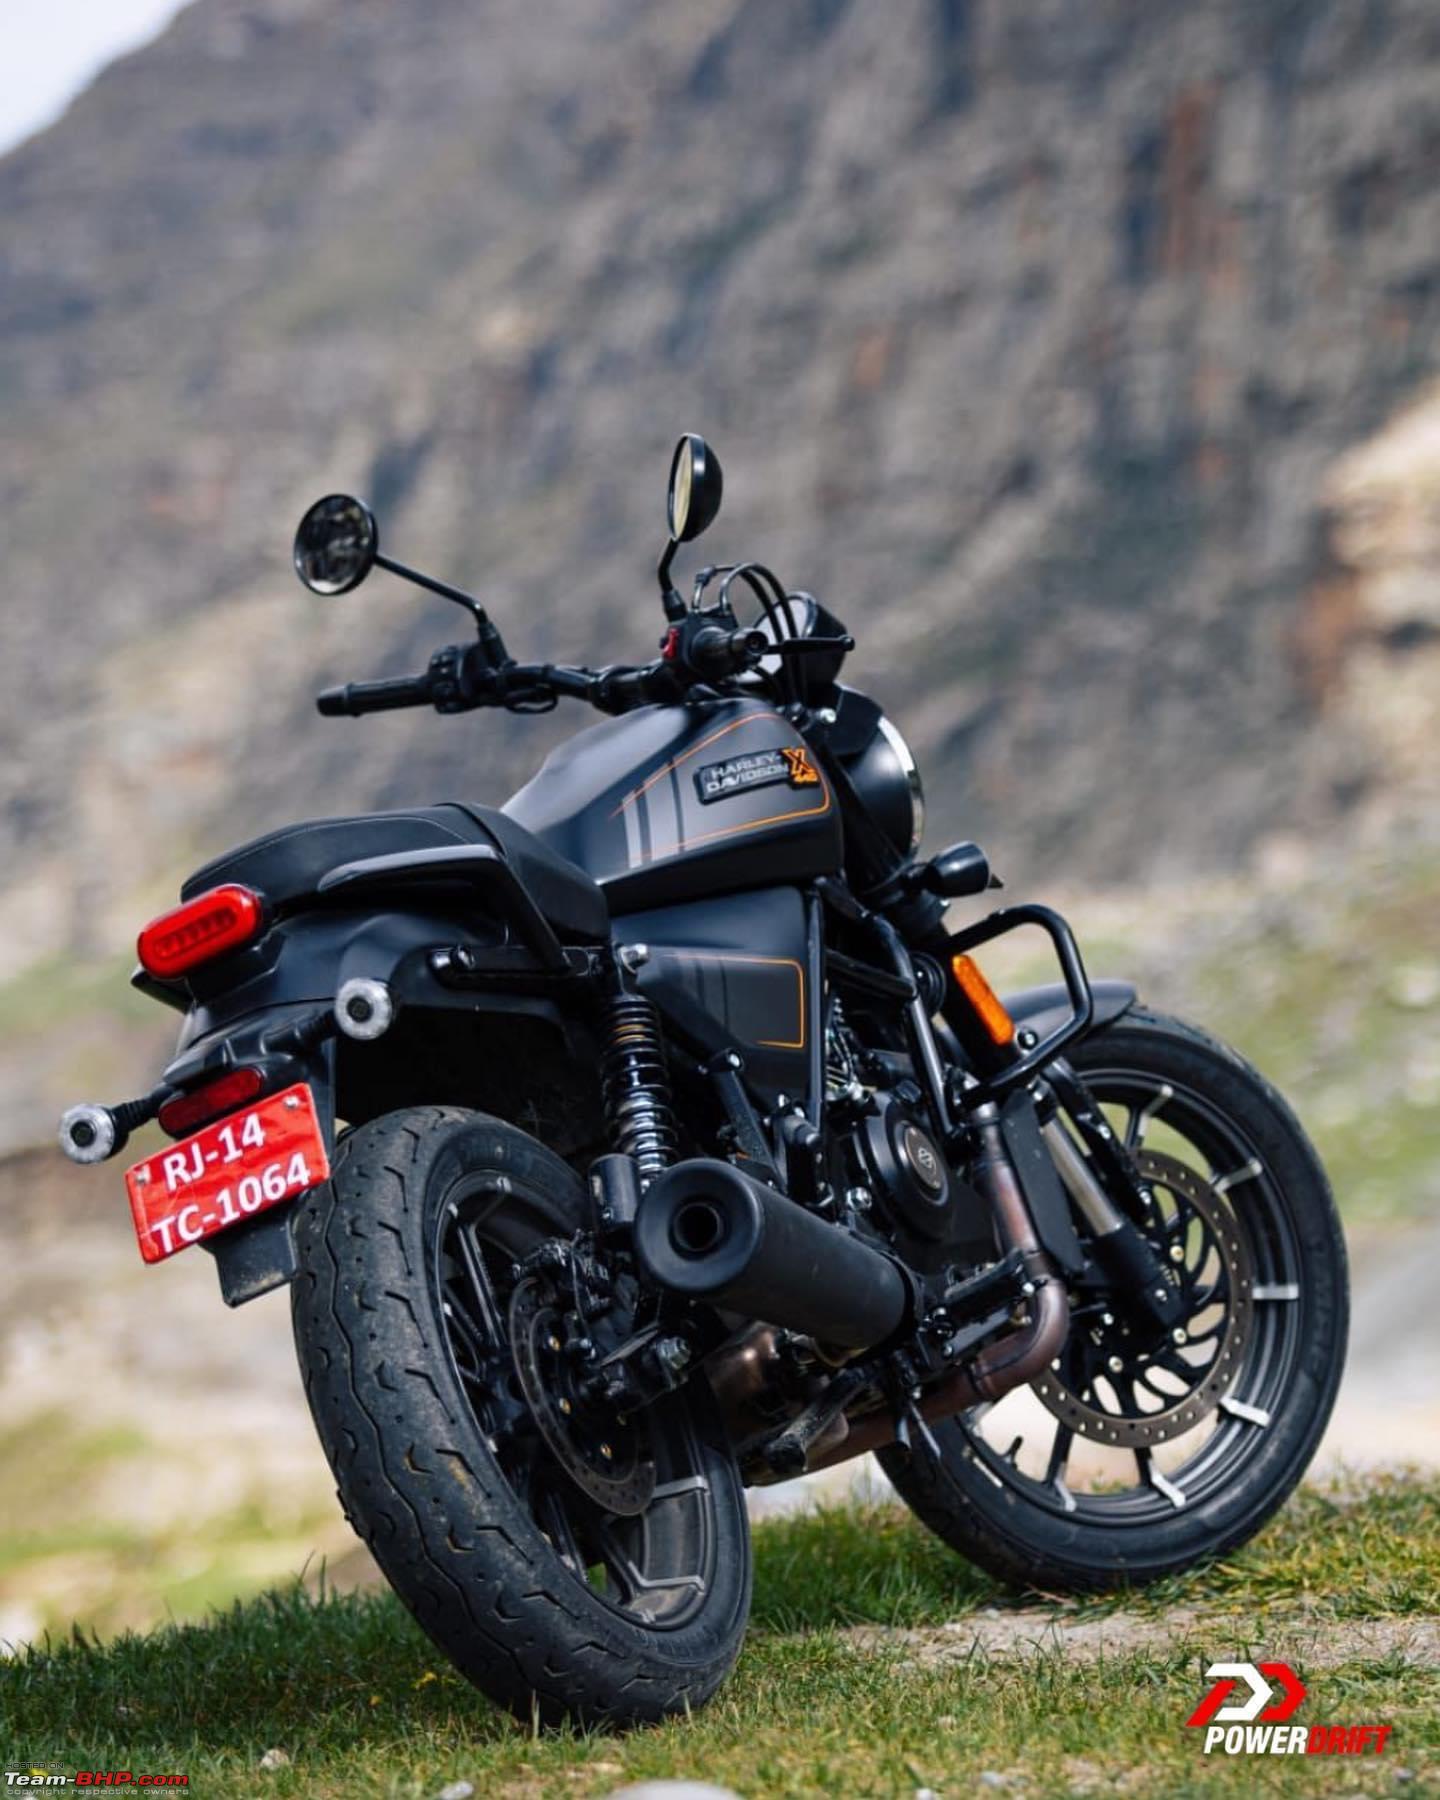 Harley-Davidson X440 launched in India at Rs 2.29 lakh - Page 5